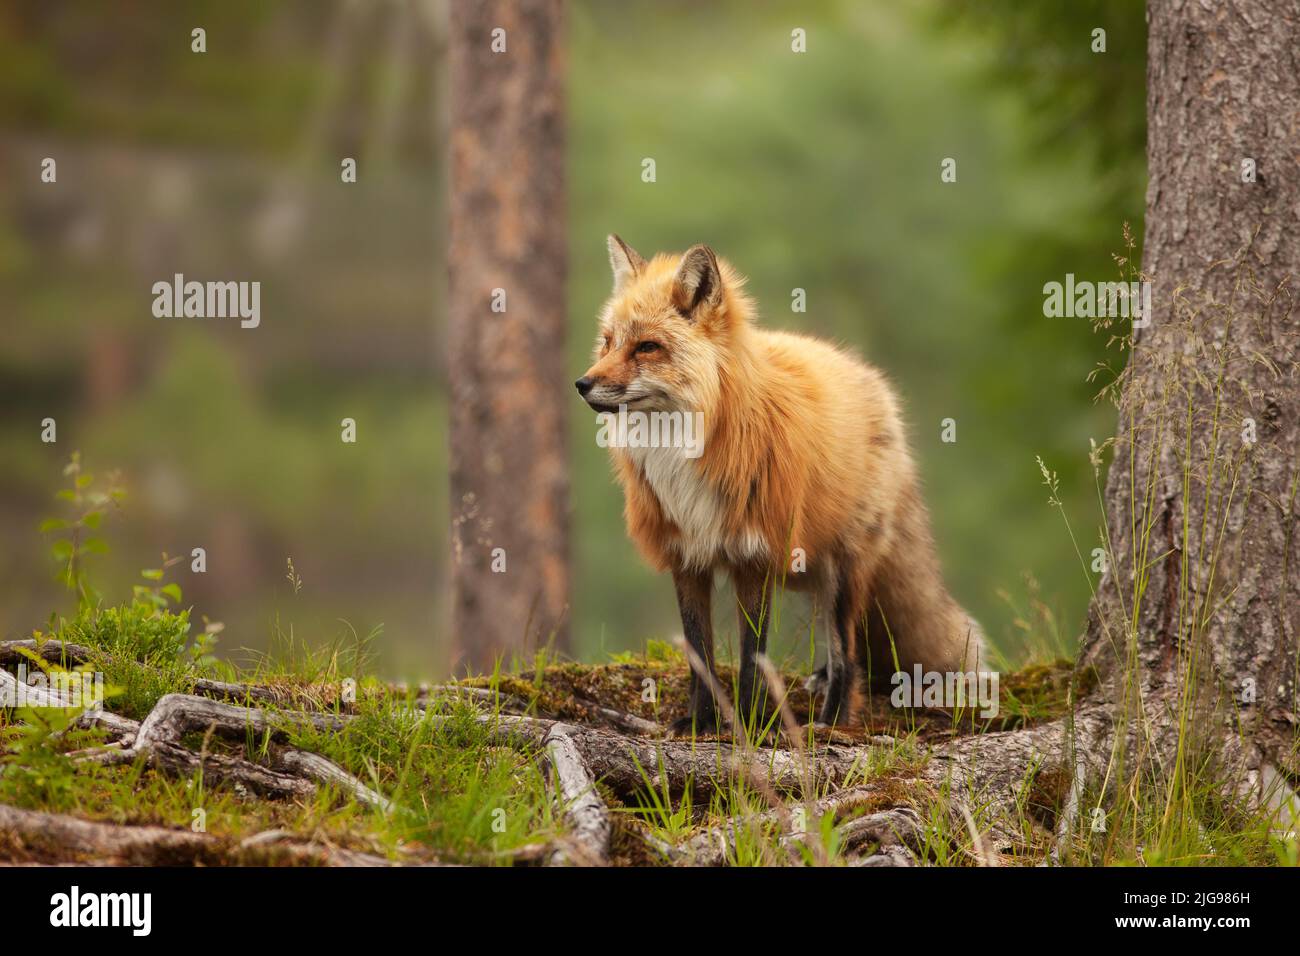 Red fox in a forest with a trees in the background. Furry animal walking around and looking for a prey. Daylight and a cloudy day in a forest. Stock Photo